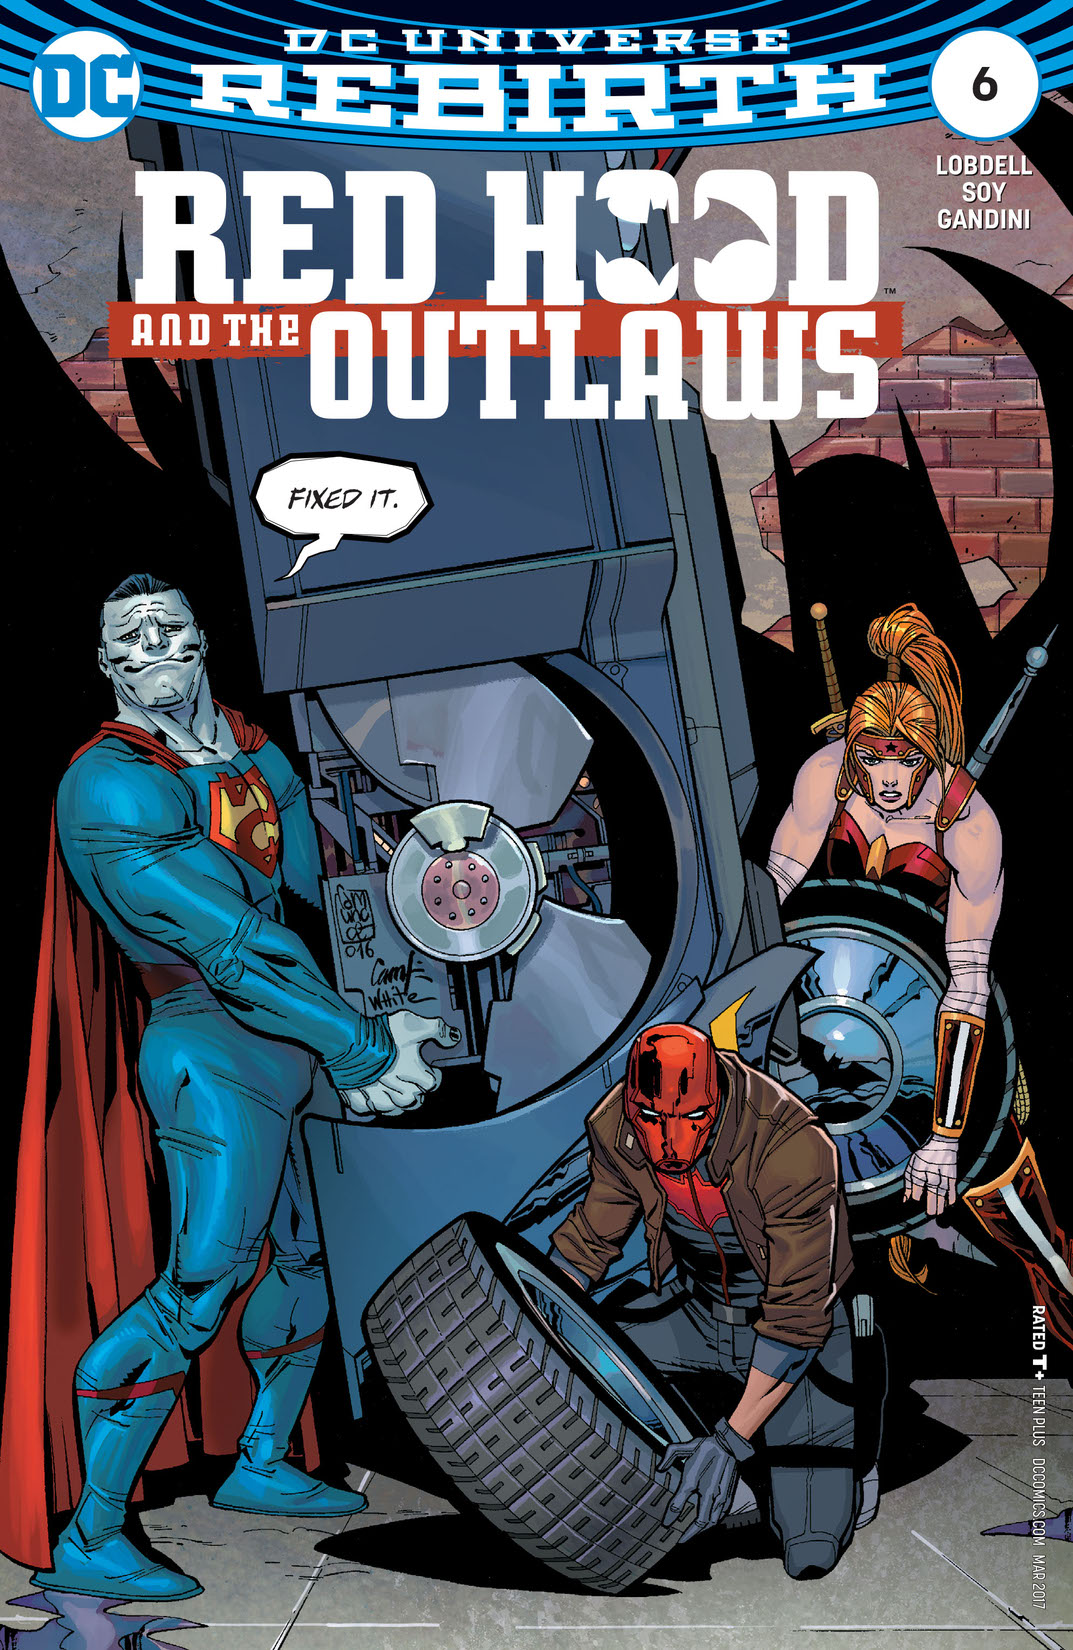 Red Hood and the Outlaws (2016-) #6 preview images